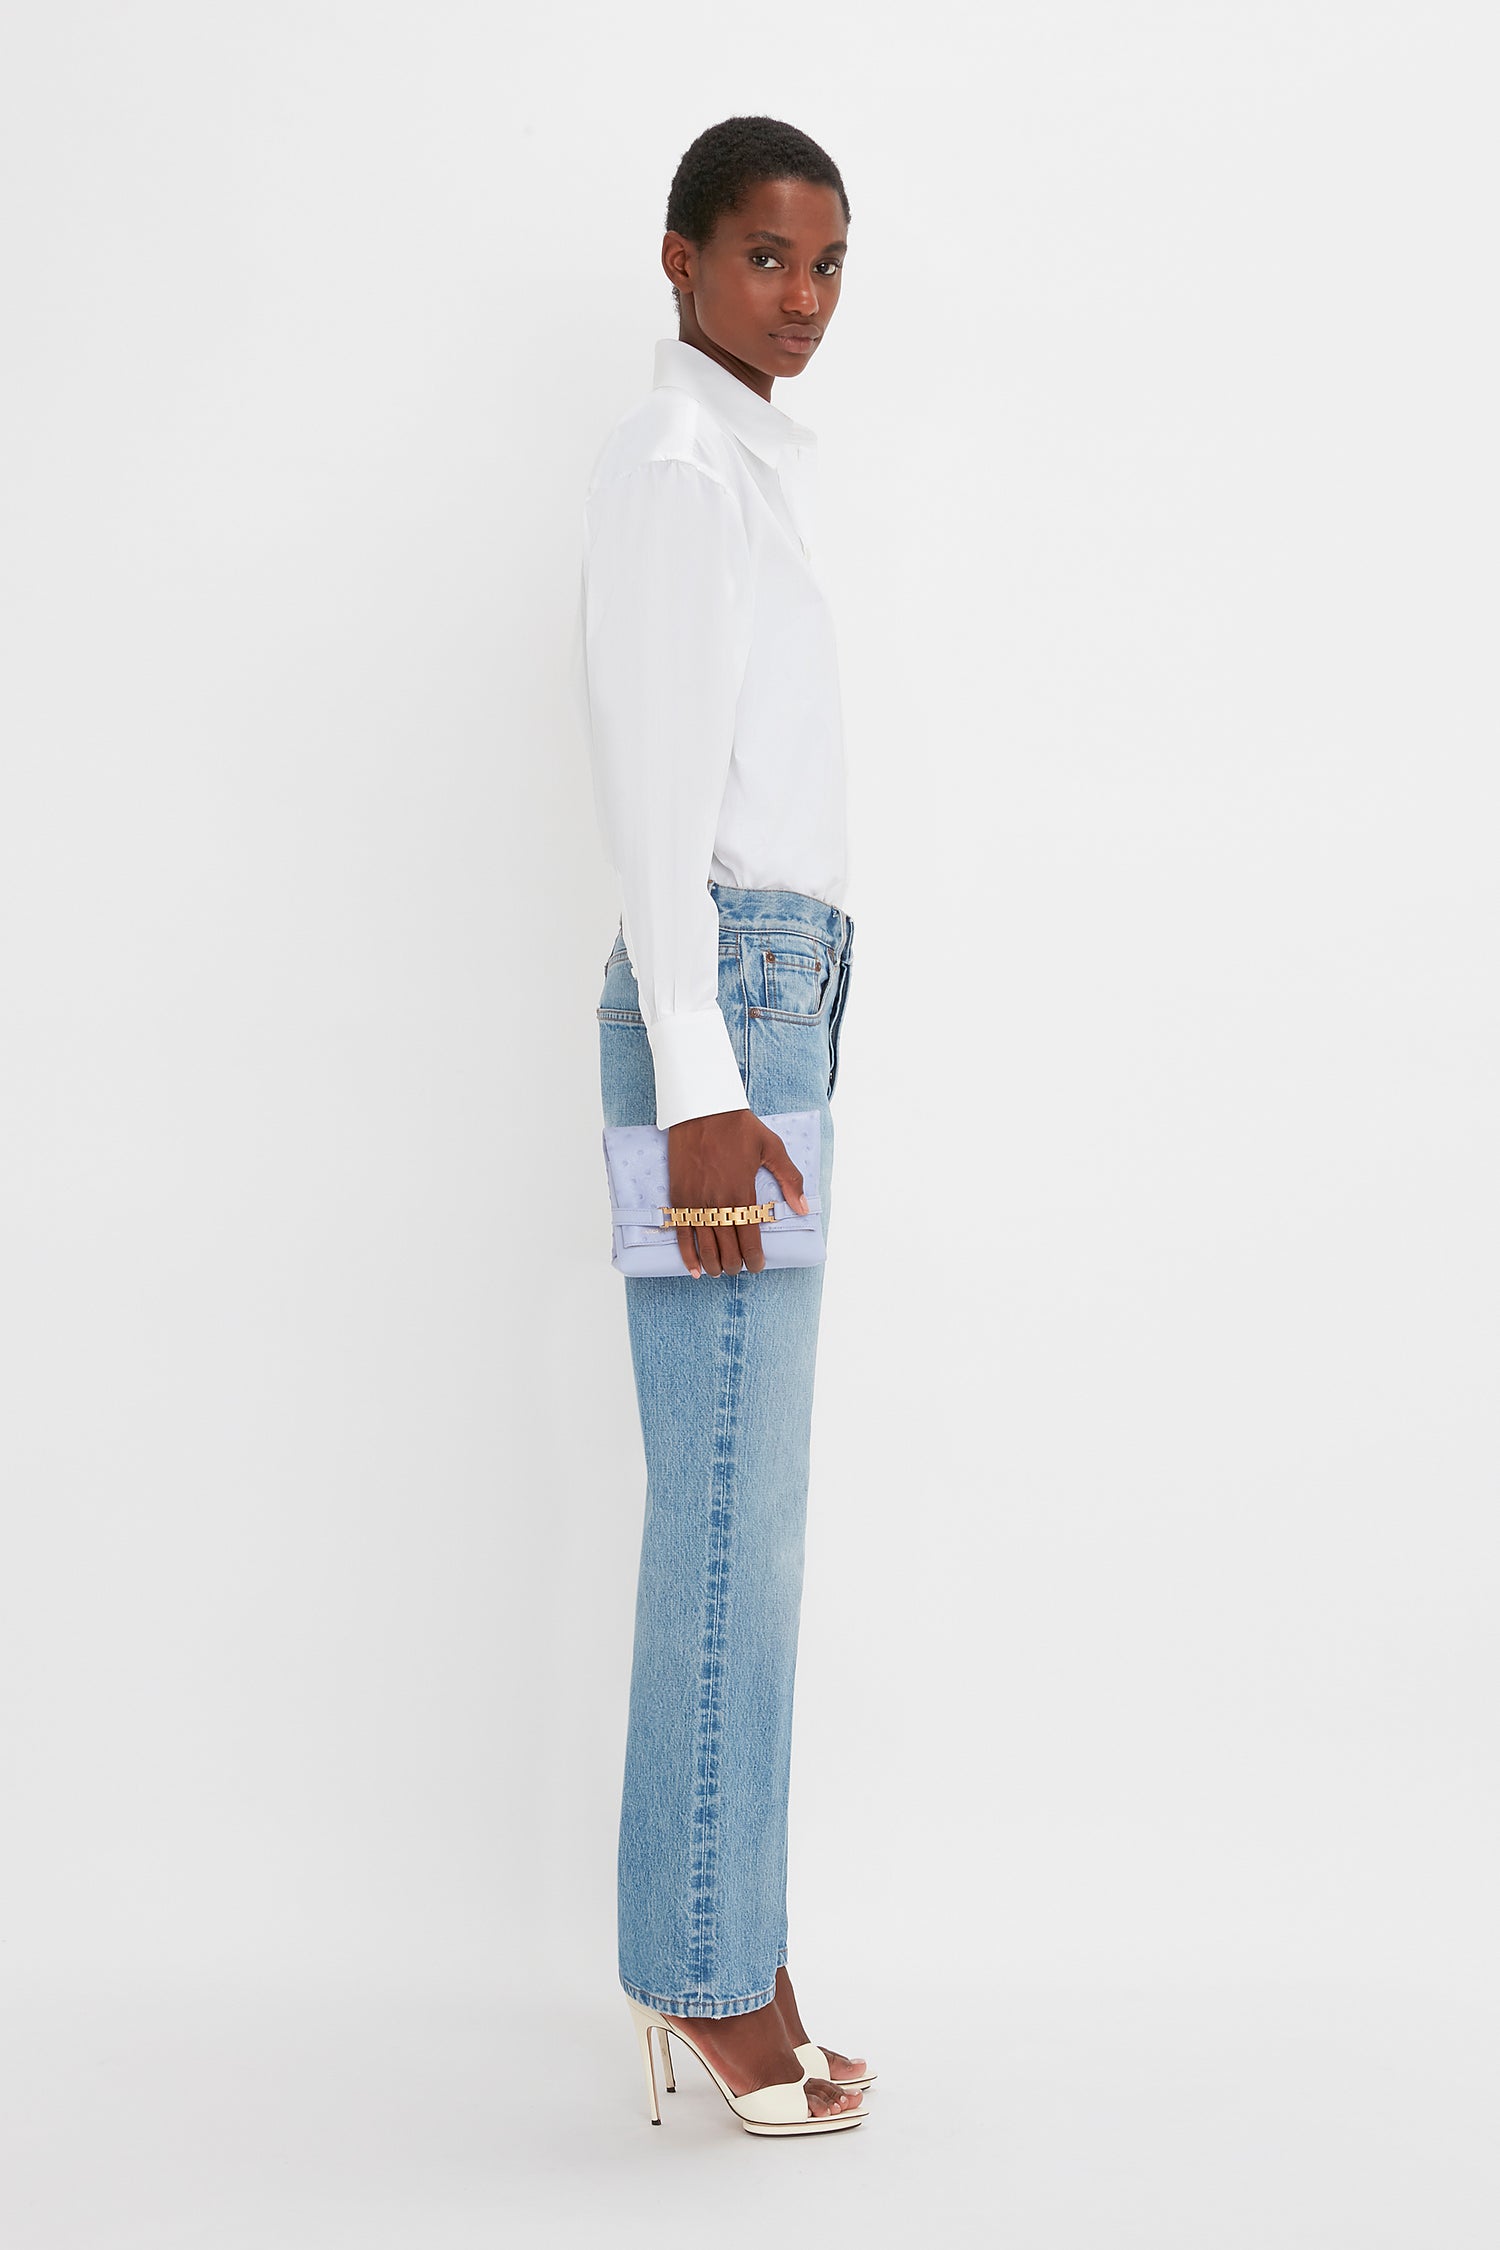 Person in a Victoria Beckham Cropped Long Sleeve Shirt In White and blue jeans holds a purple clutch, standing sideways. They wear white high-heeled shoes. Background is plain white.